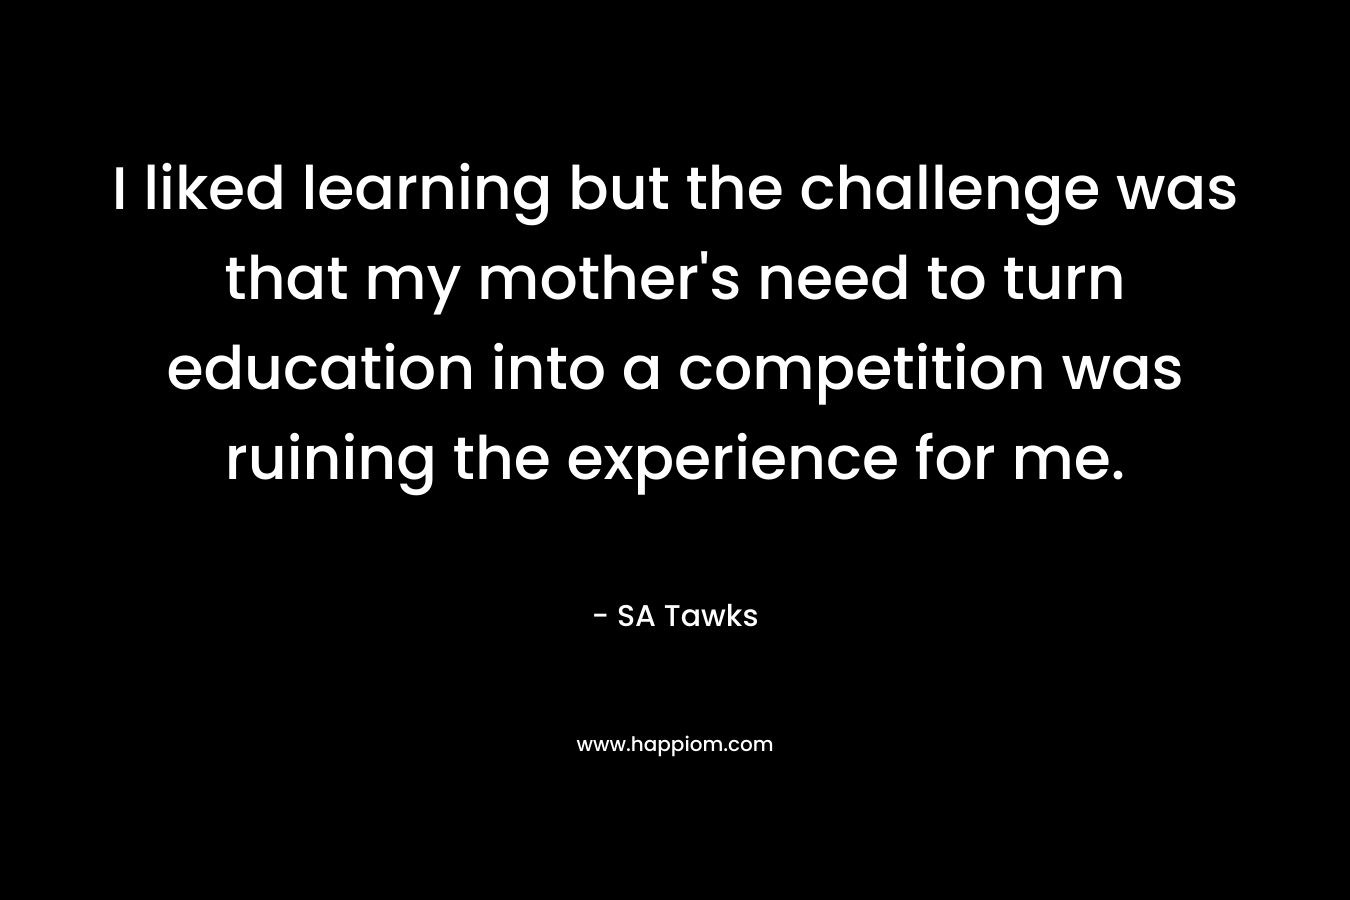 I liked learning but the challenge was that my mother's need to turn education into a competition was ruining the experience for me.